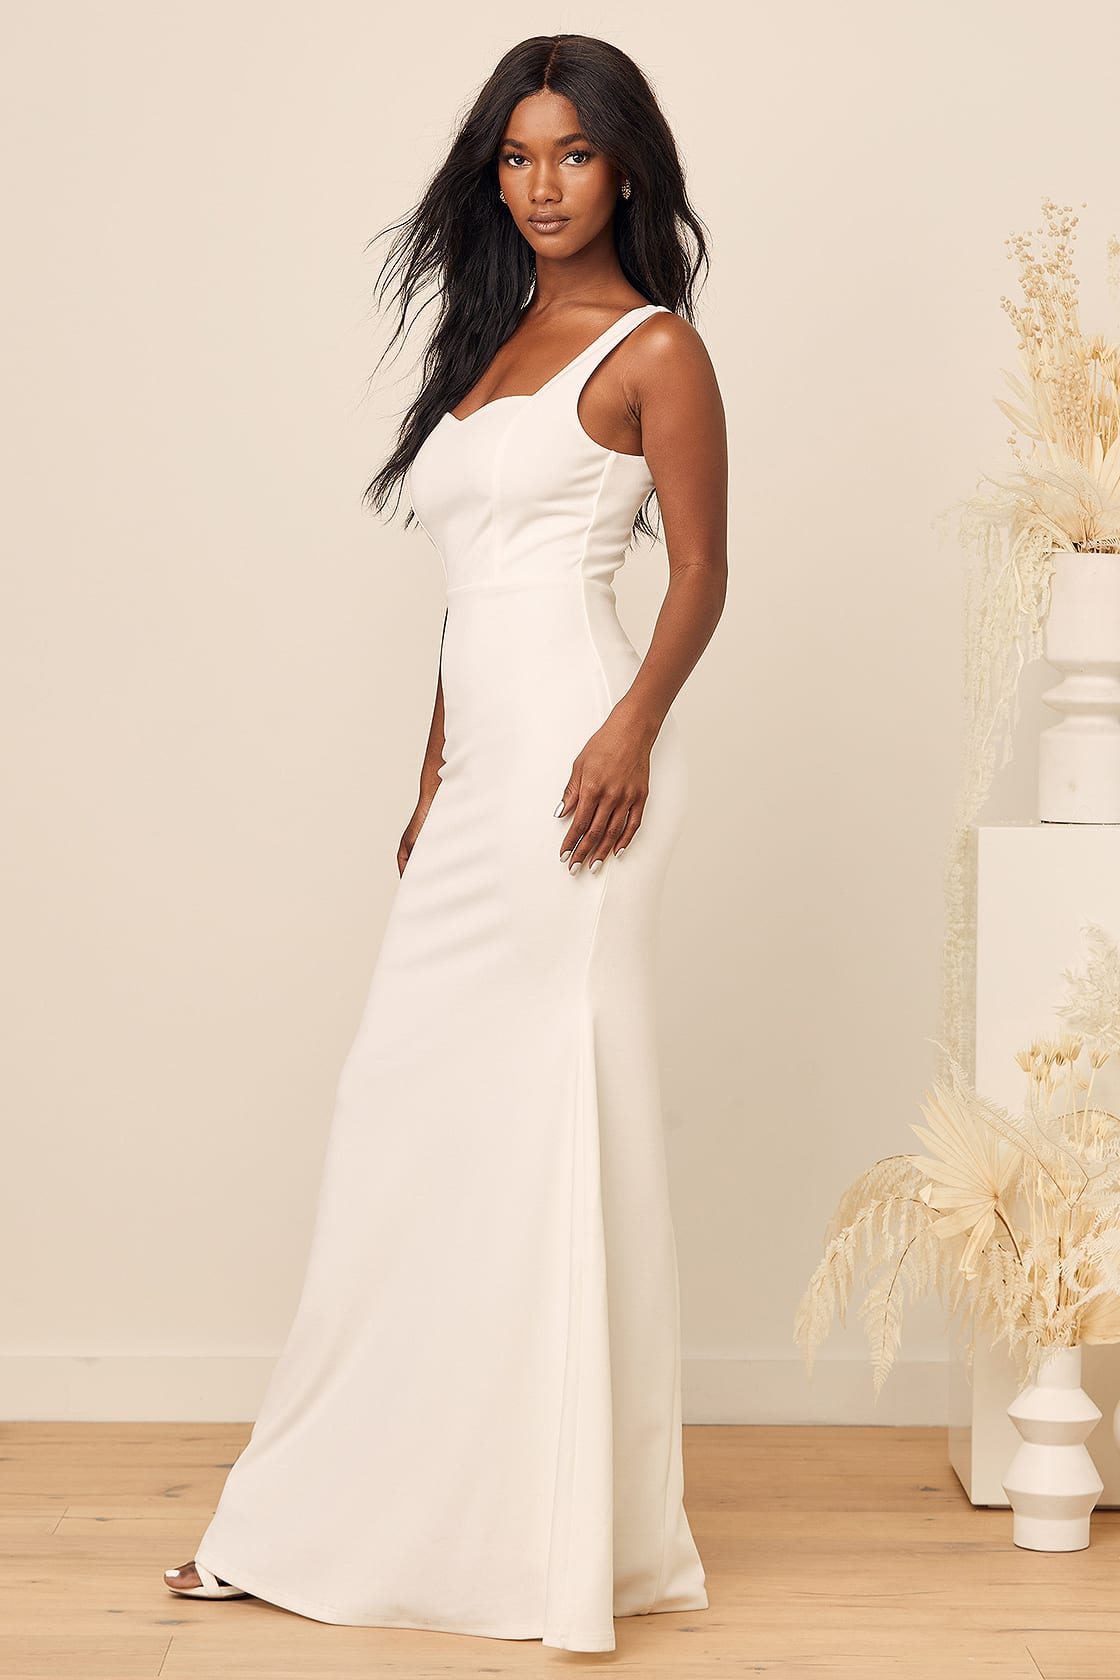 Wedding Dress Shopping: What to Do and When - Viero Bridal